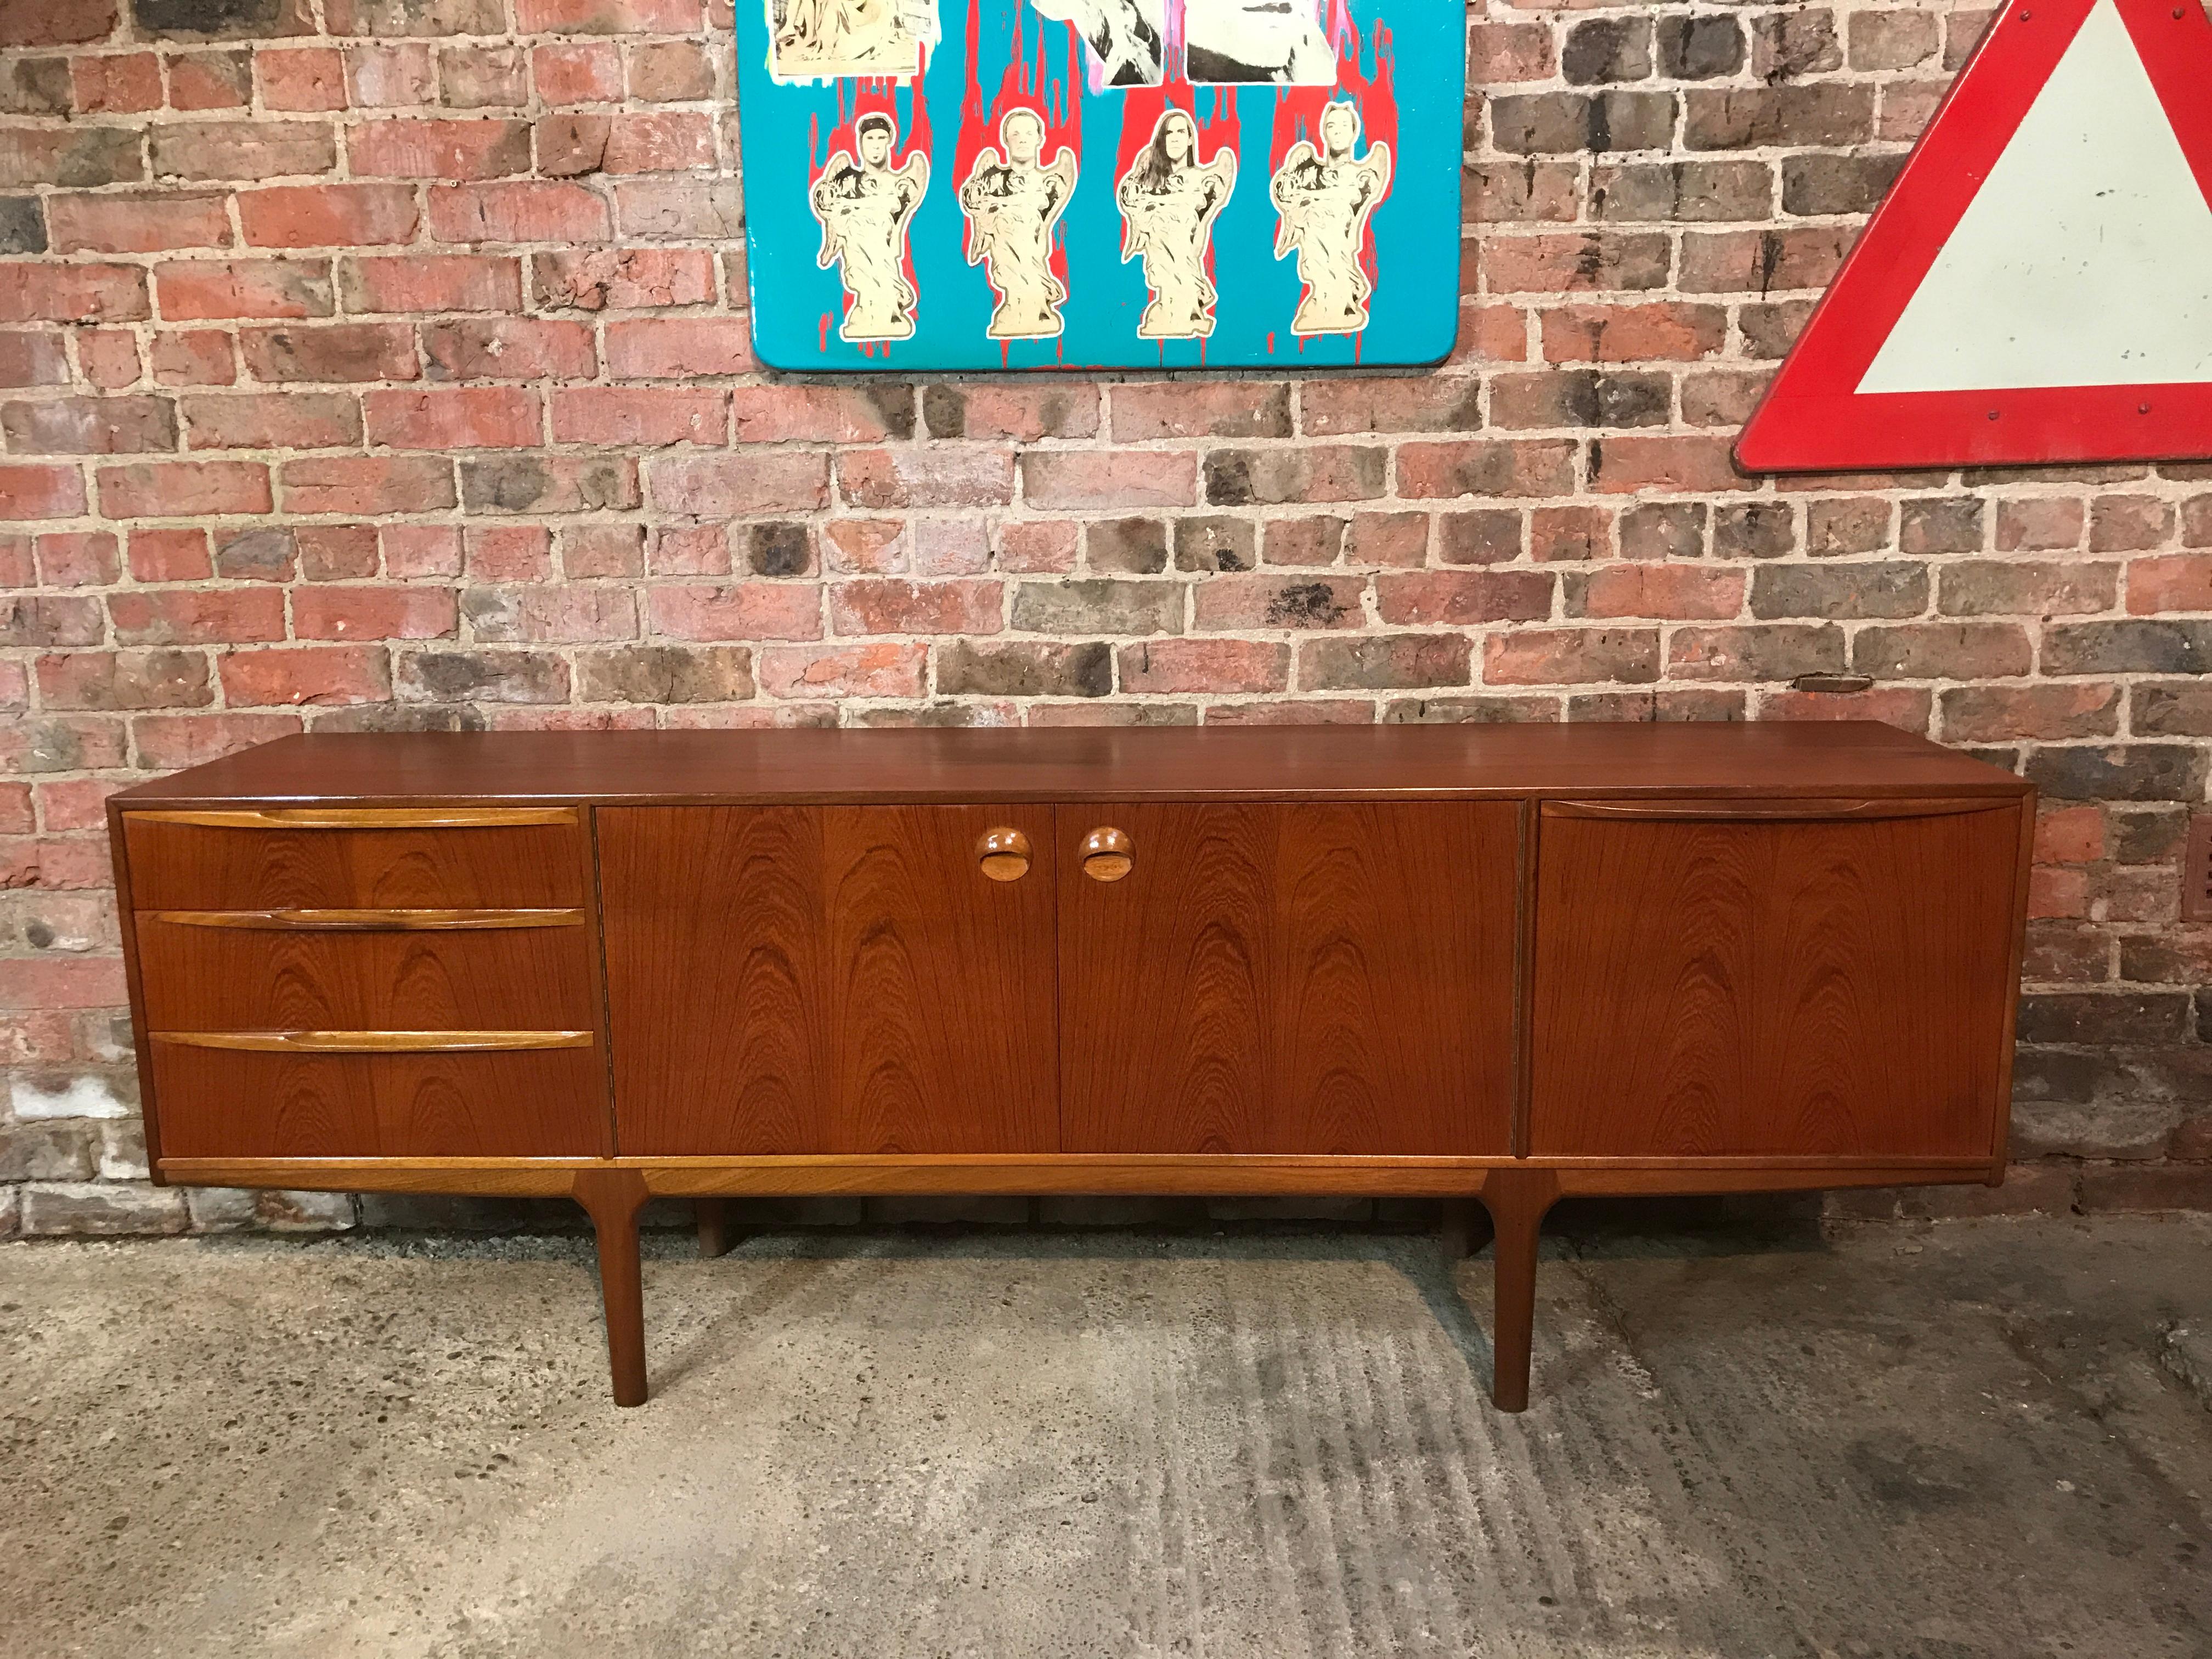 Vintage 1960s McIntosh sideboard by Tom Robertson. It has three drawers, cupboard space with lovely round handles, and a drinks section with a useful pull-out shelf. Credenza is in very good original condition.